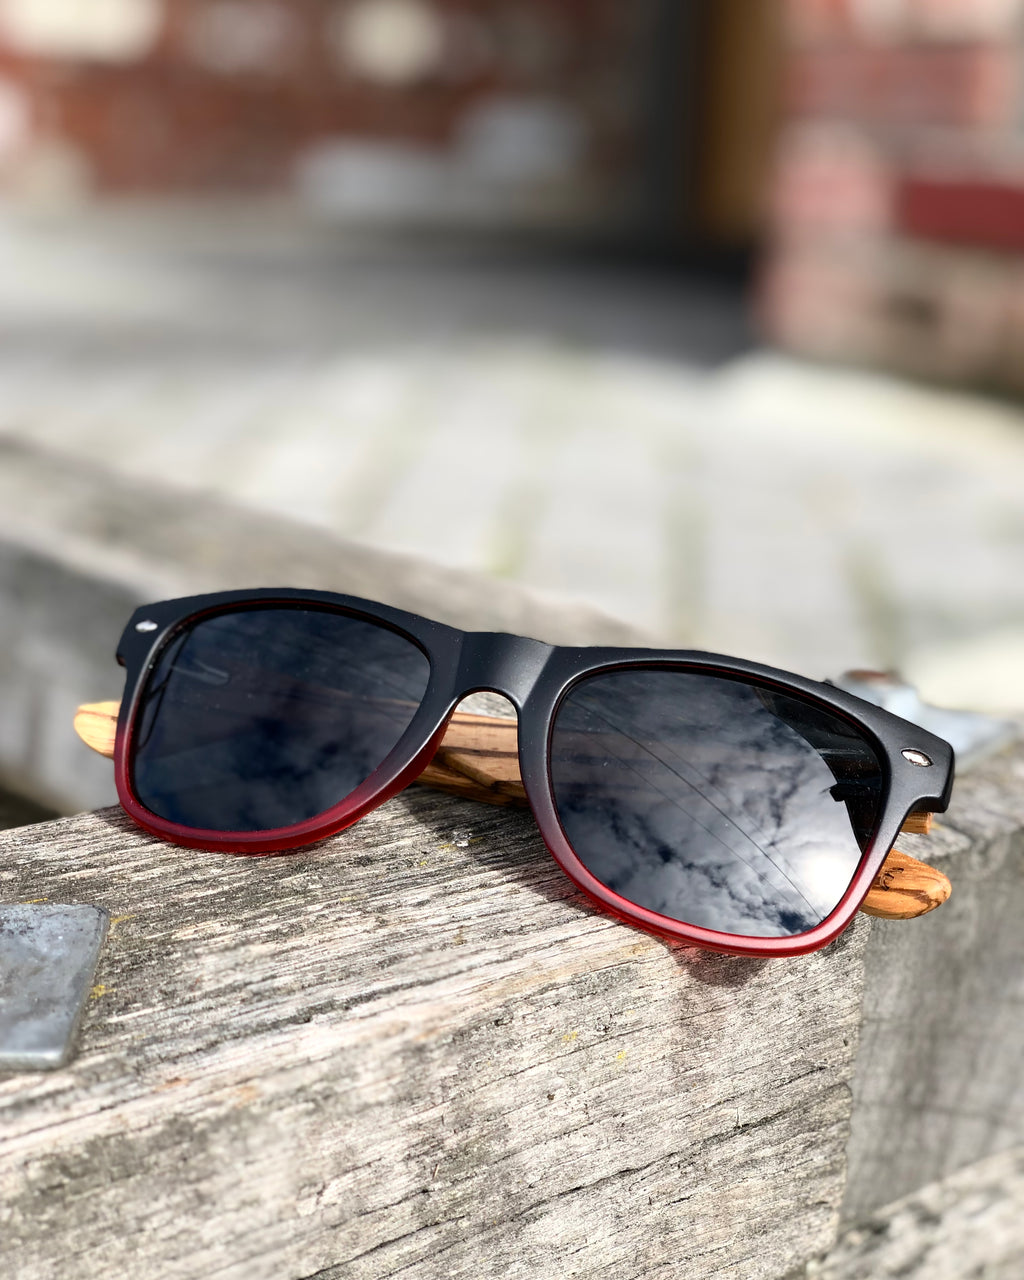 Electric Pukeko Sunglasses - Gradient Black to Red Frames with Zebrano Wood Arms